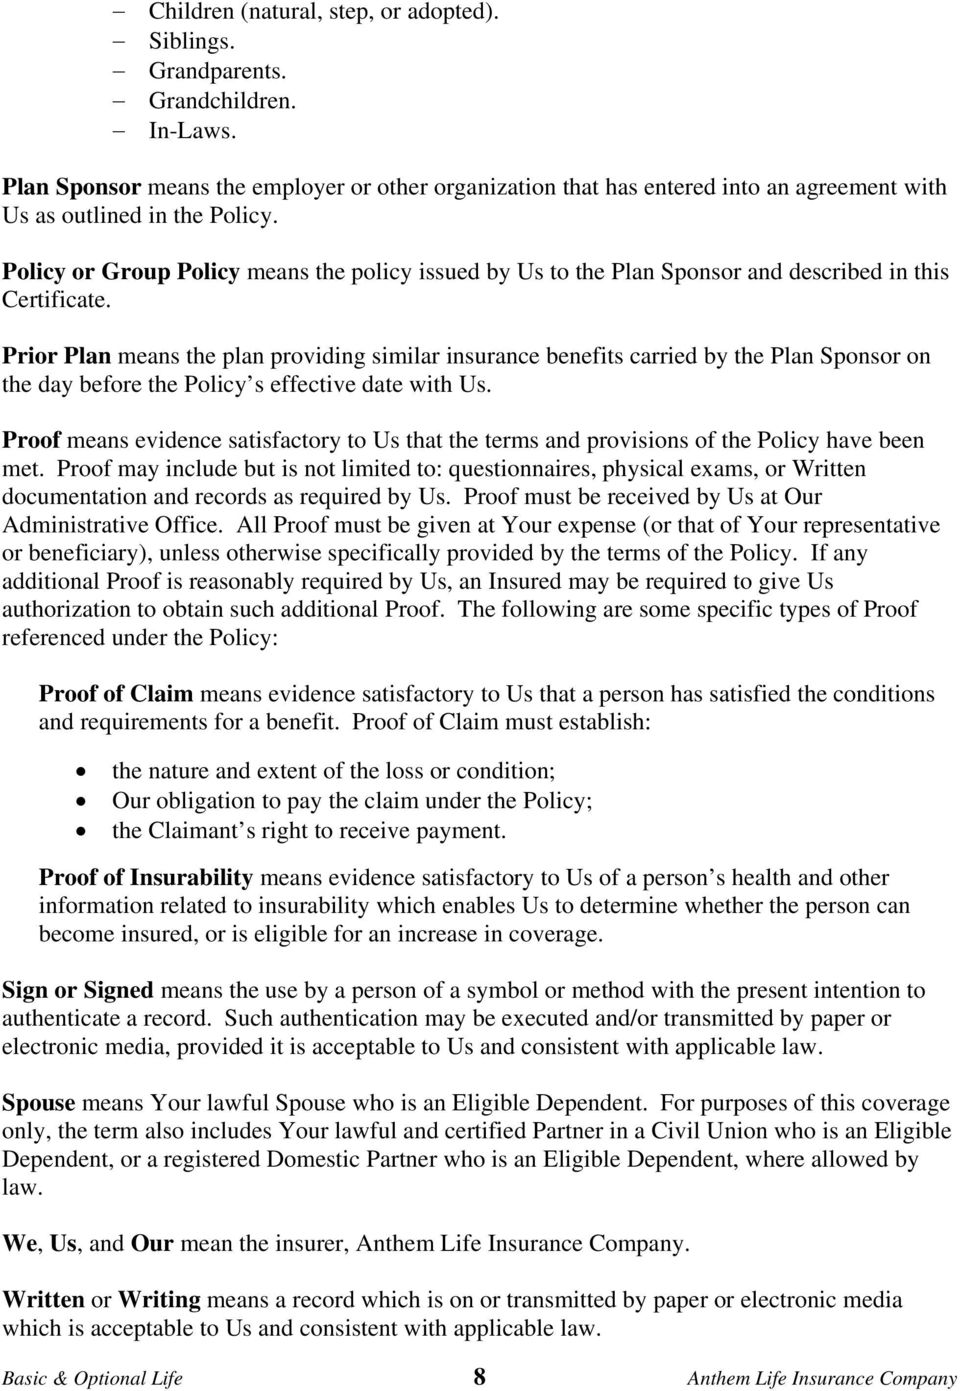 Policy or Group Policy means the policy issued by Us to the Plan Sponsor and described in this Certificate.